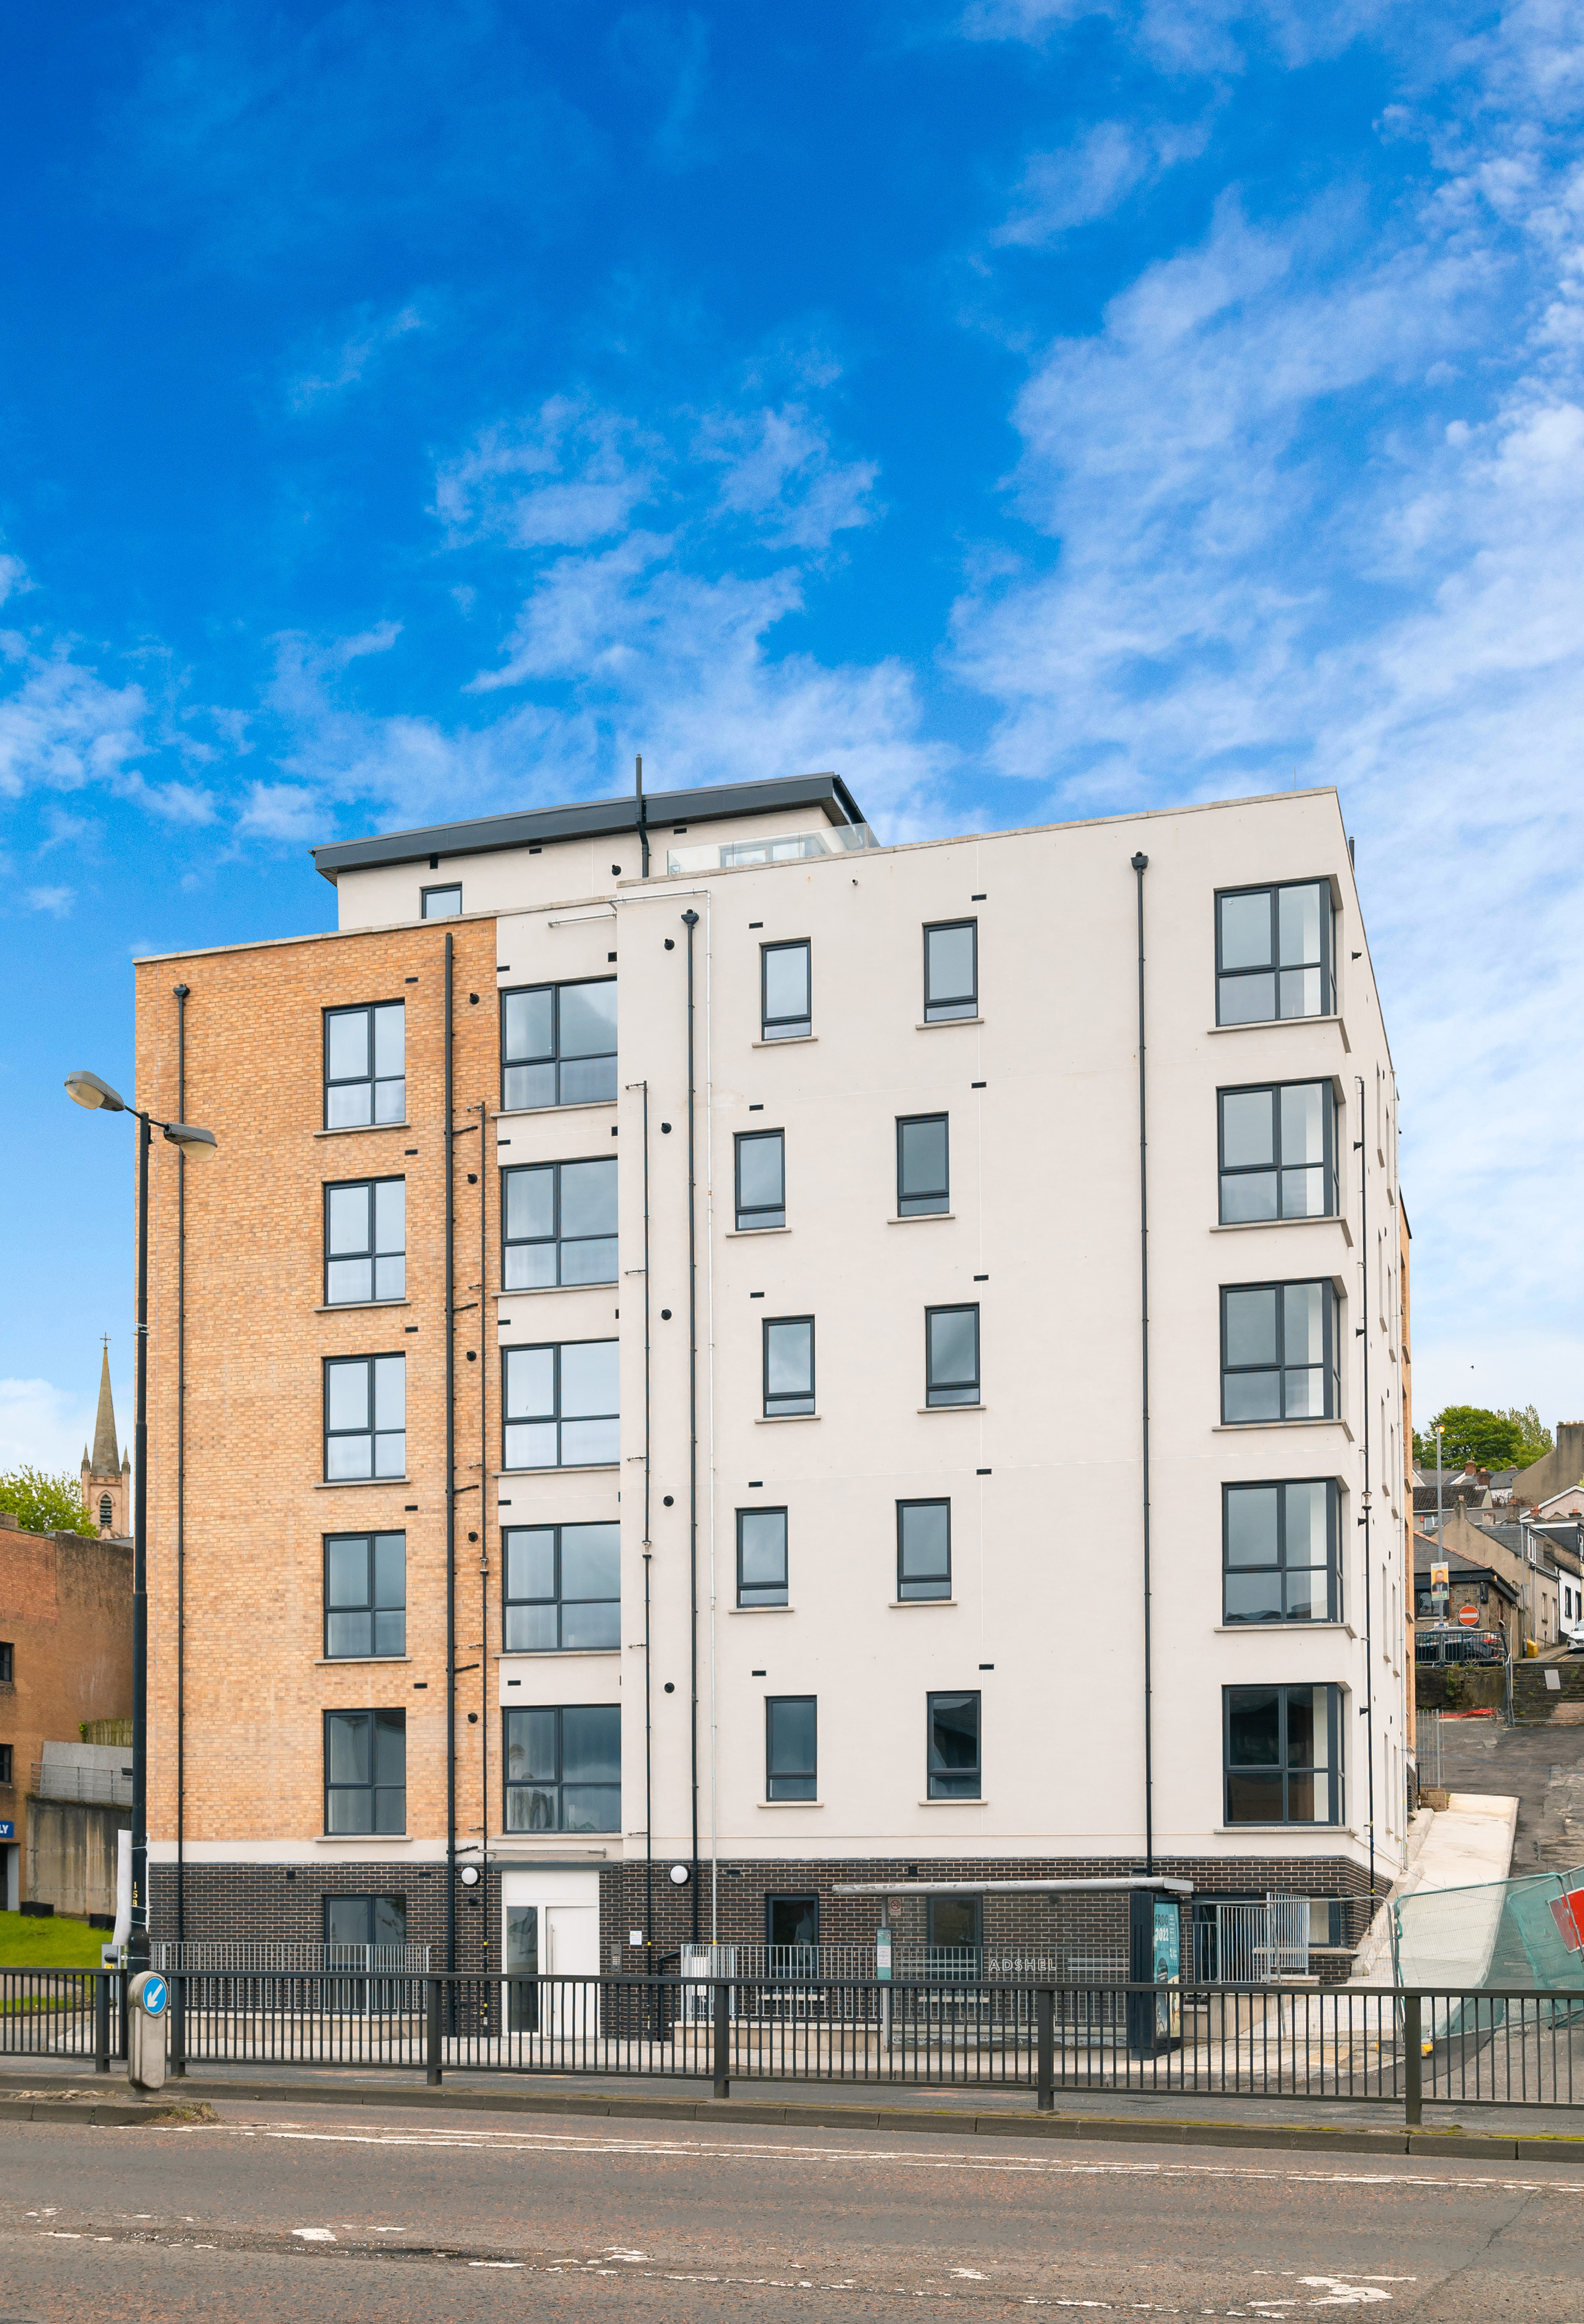 Apartments to let at Station View